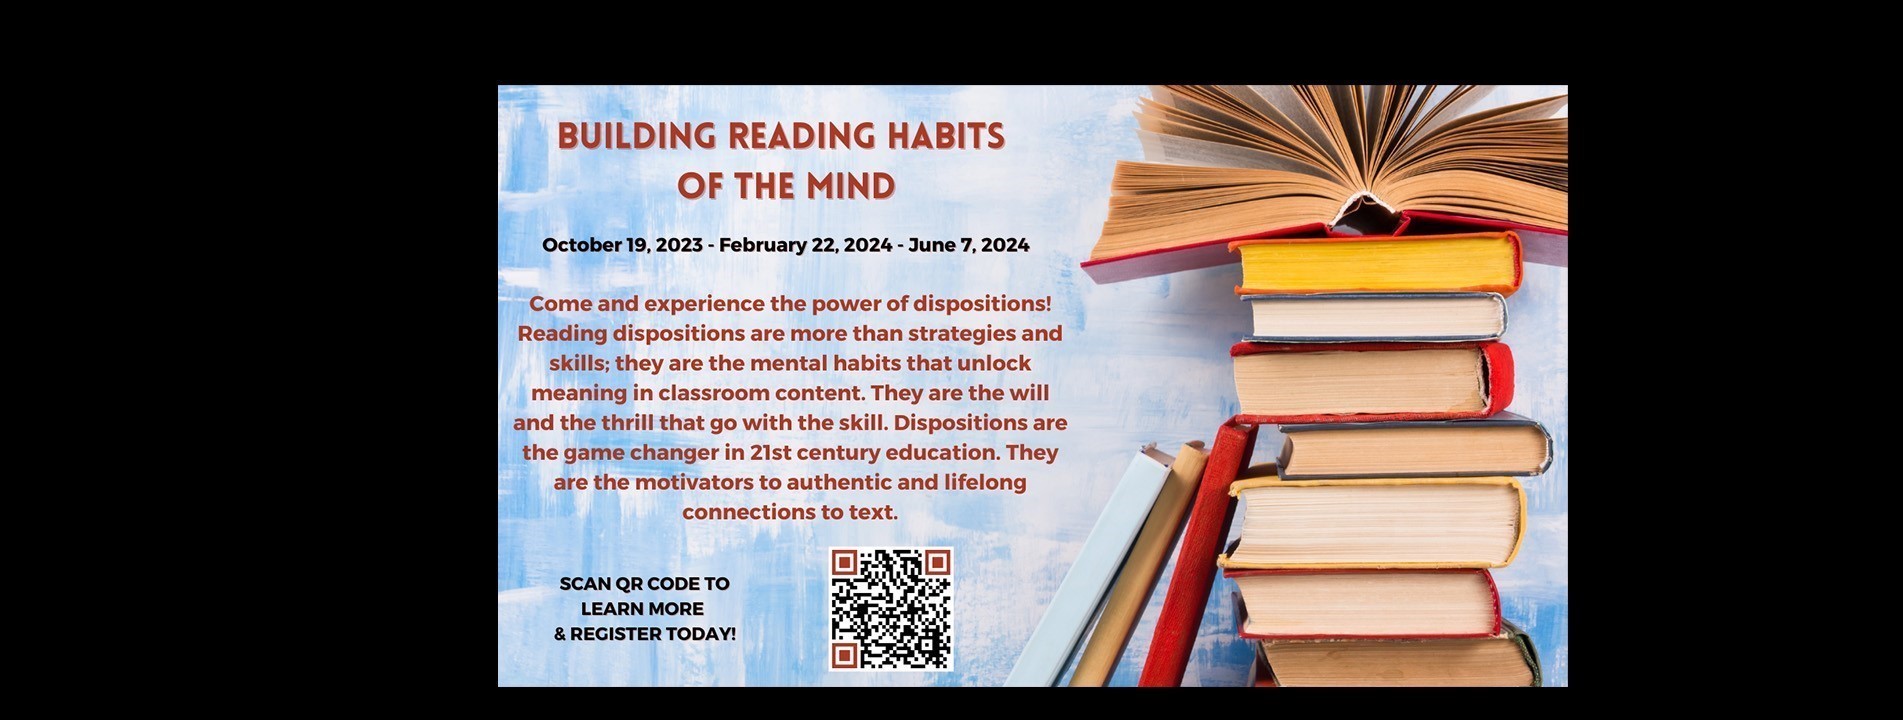 Building Reading Habits of the Mind. October 19, 2023; February 22, 2024; June 7, 2024. Come and experience the power of dispositions! Reading dispositions are more than strategies and skills; they are the mental habits that unlock meaning in classroom content. They are the will and the thrill that go with the skill. Dispositions are the game changer in 21st century education. They are the motivators to authentic and lifelong connections to text.